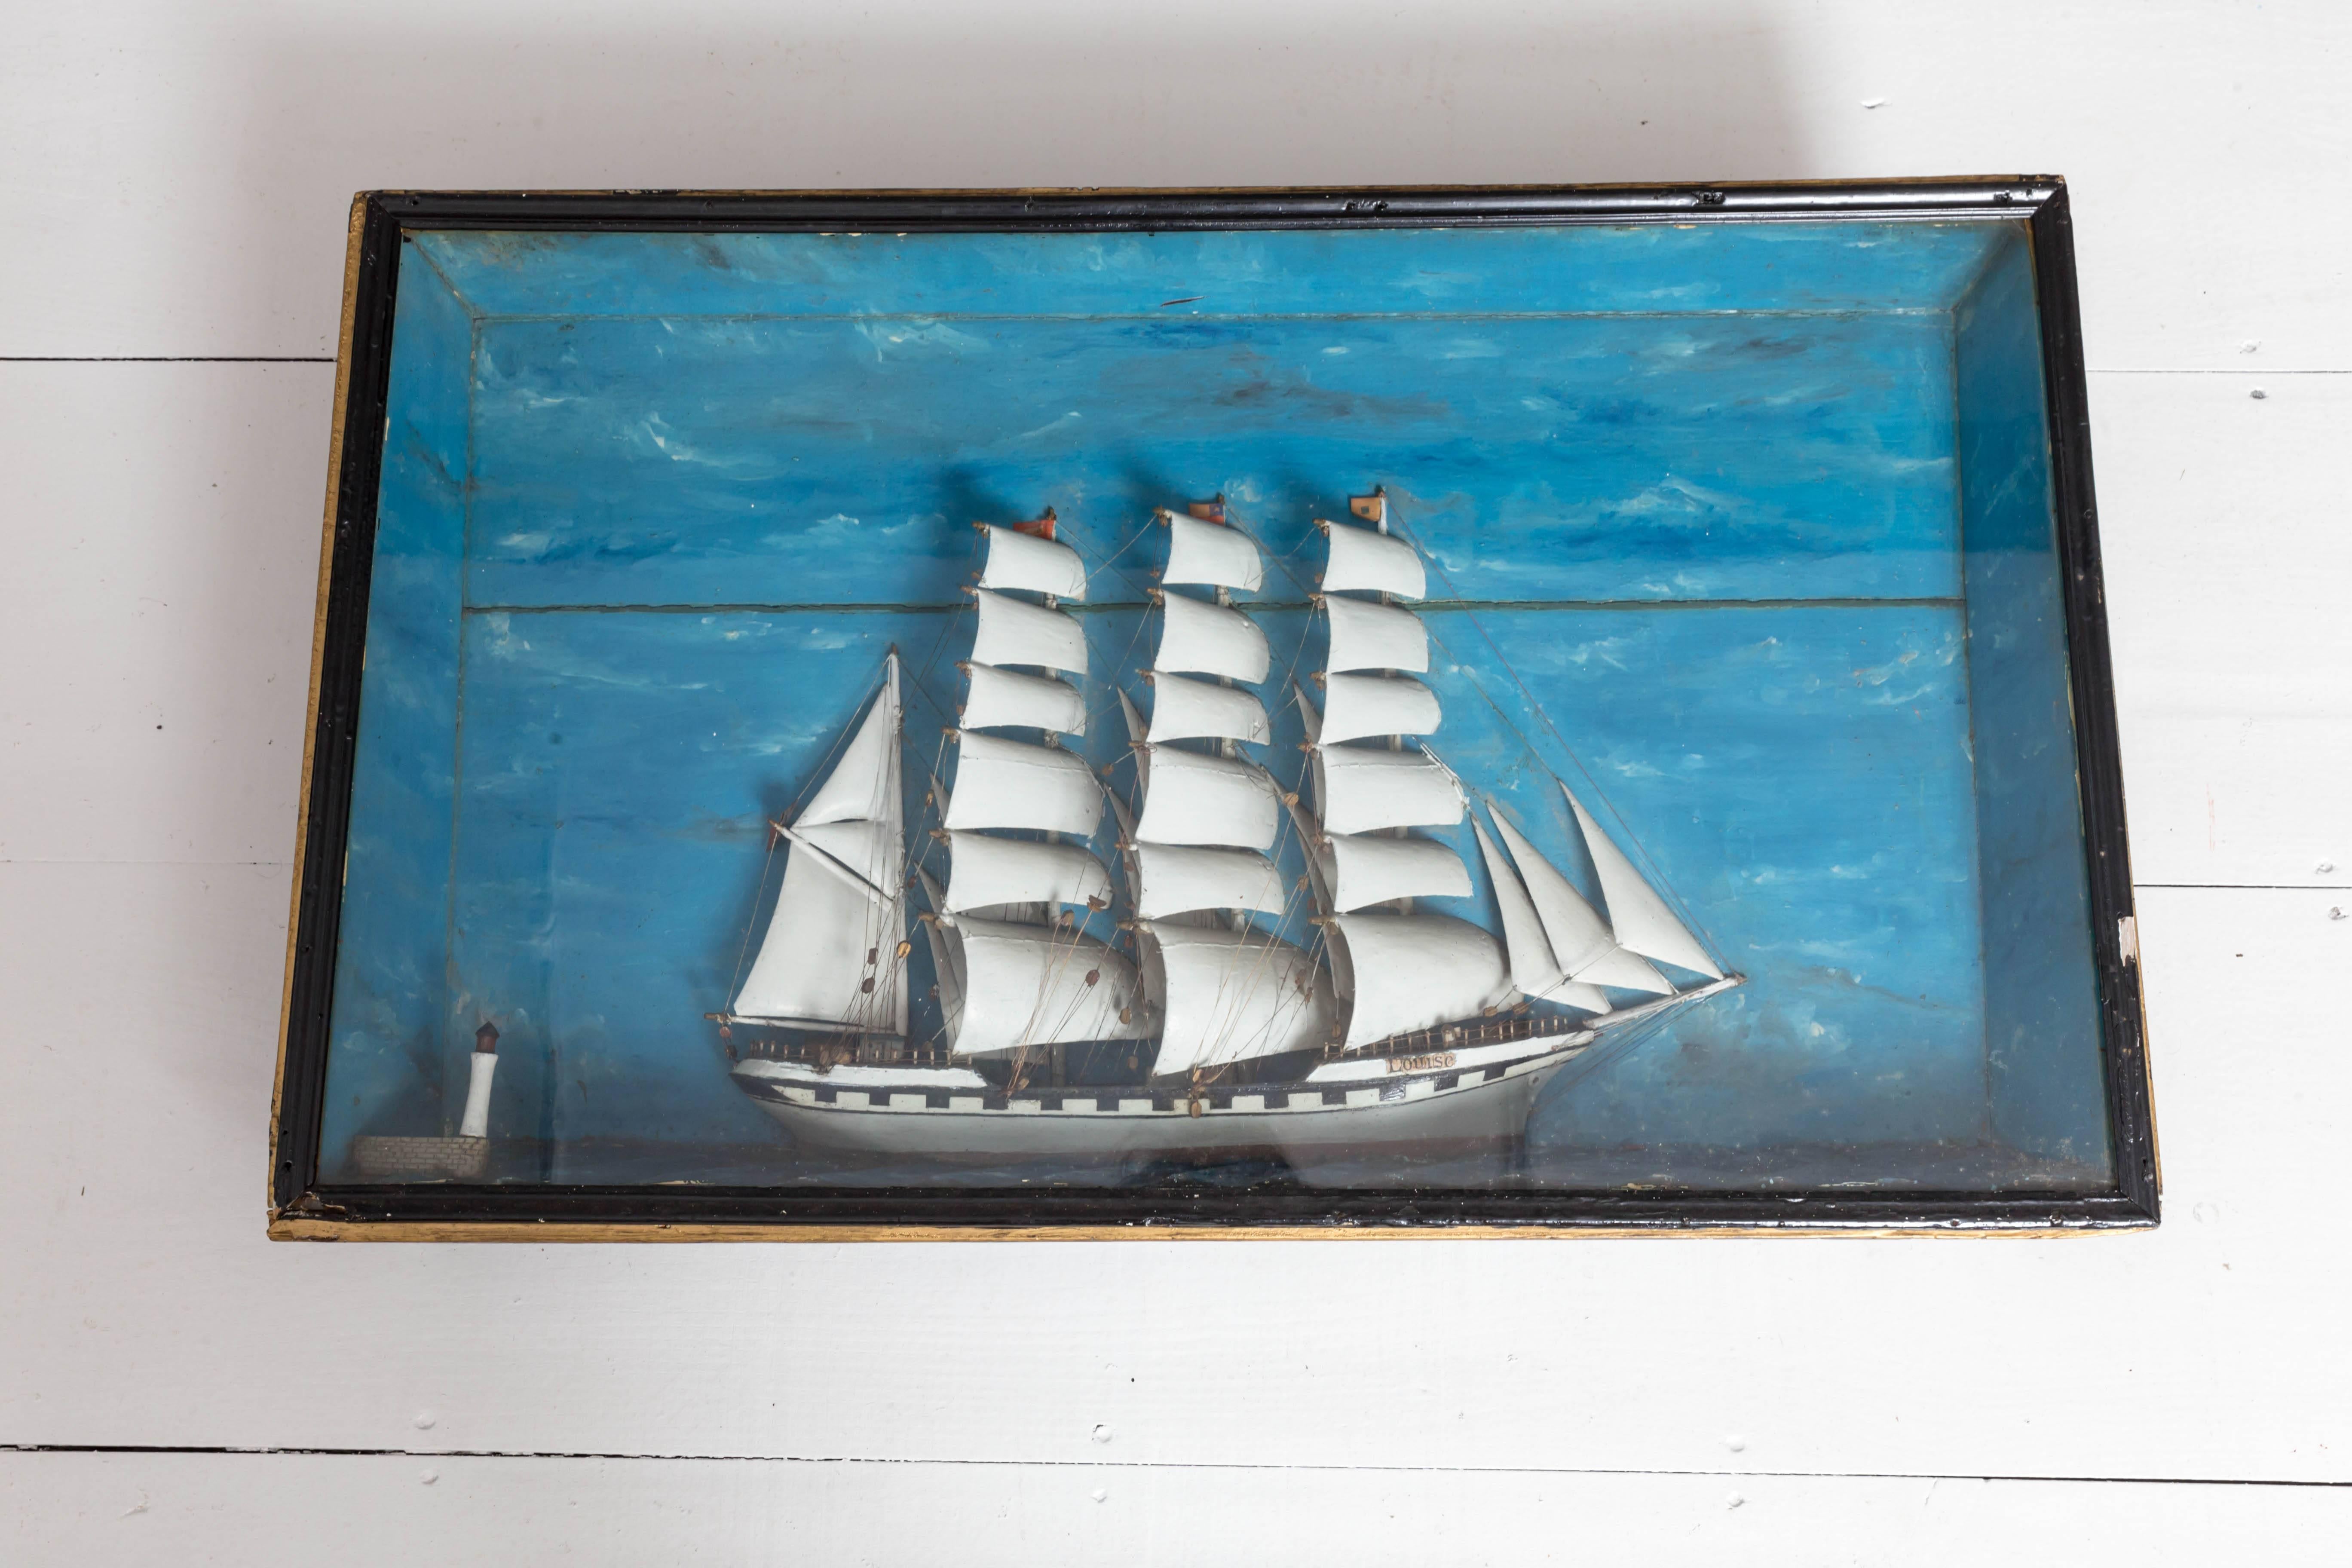 French ship diorama with a large Schooner and small lighthouse. Hand-carved out of wood which includes the hull, sails, masts, and accoutrements. Mounted in a deep mitered wood frame with painted sea and sky background.